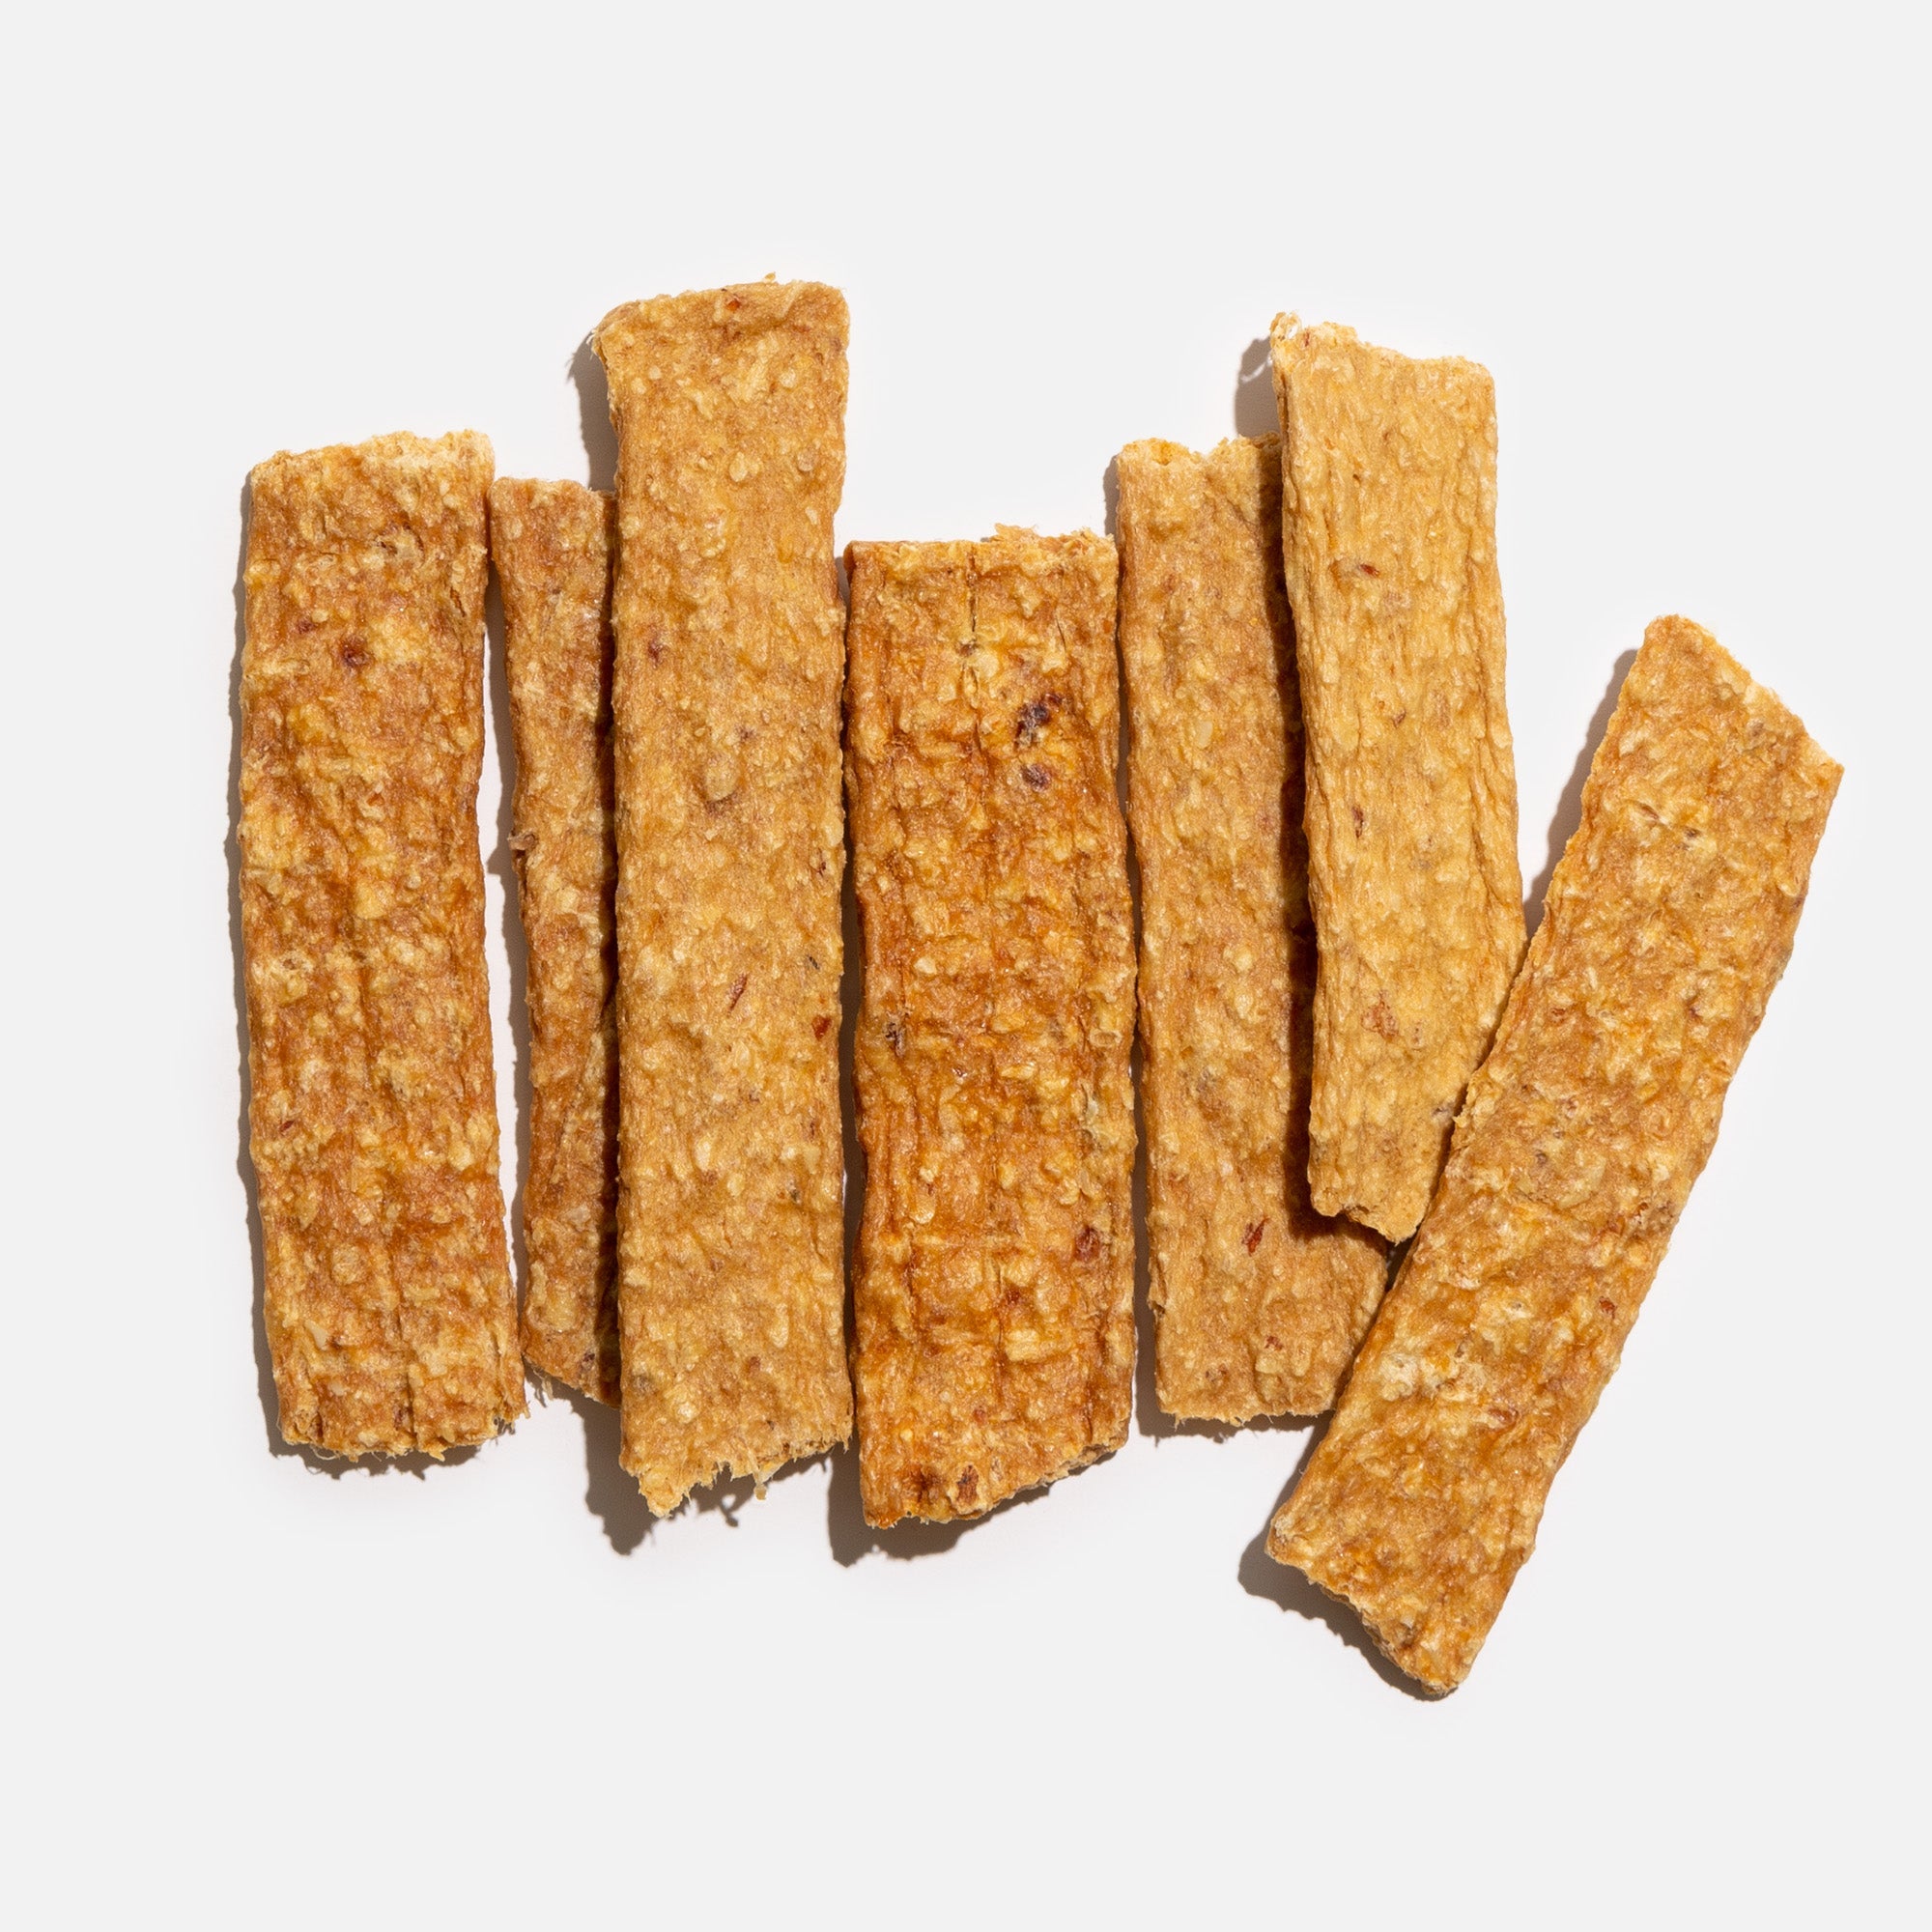 Dr. Kelly The Vet 100% Natural Dog Treats Chicken - Healthy and delicious chicken dog treats for your furry friend.